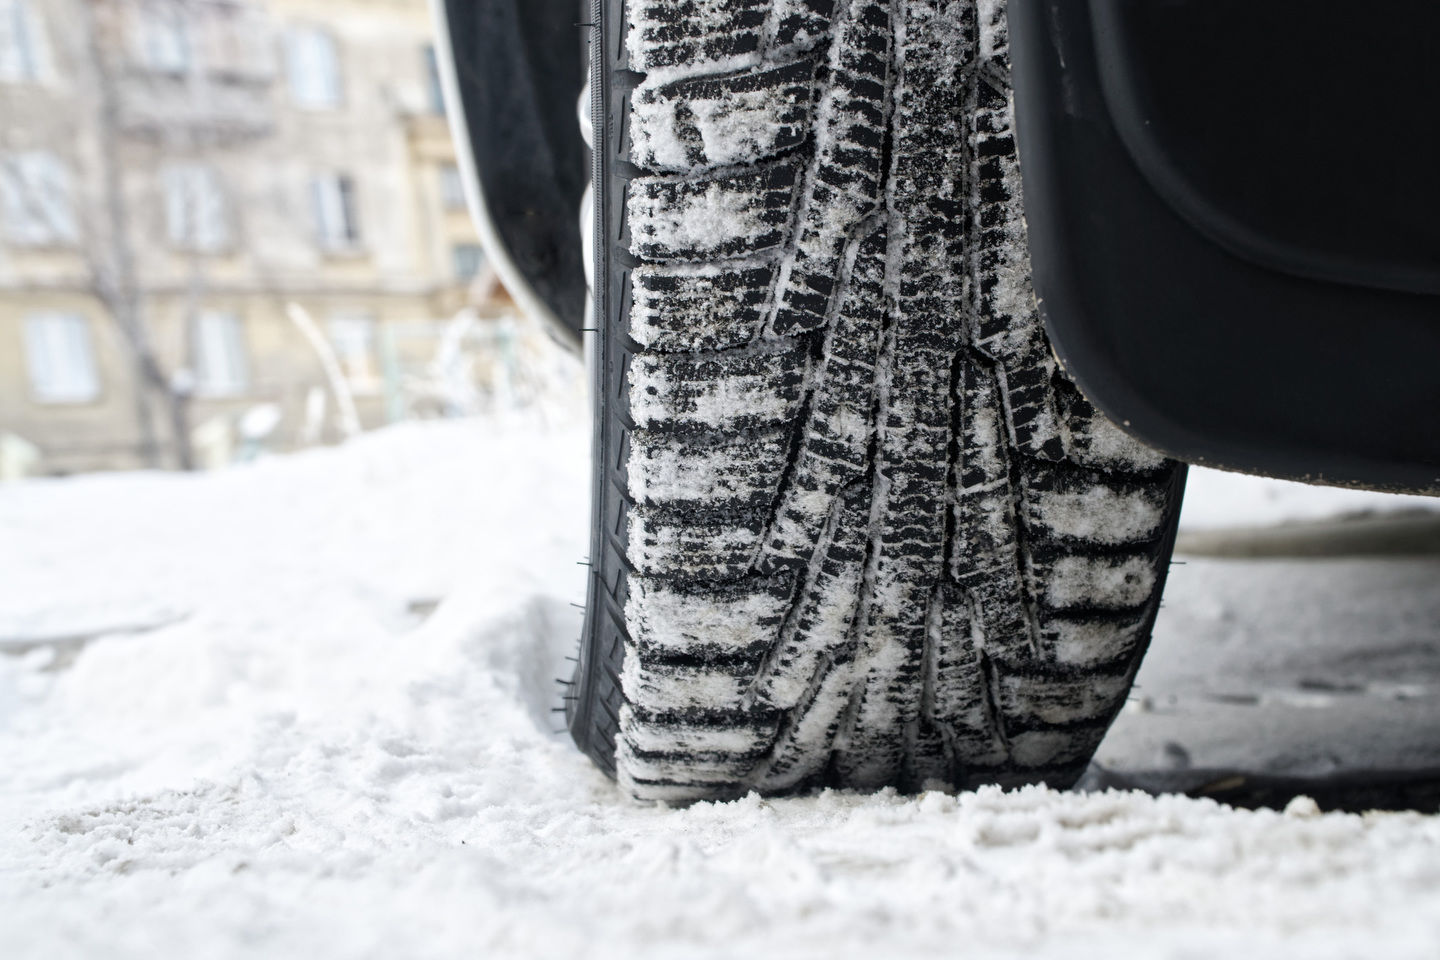 How do you know if your Mazda needs new winter tires?